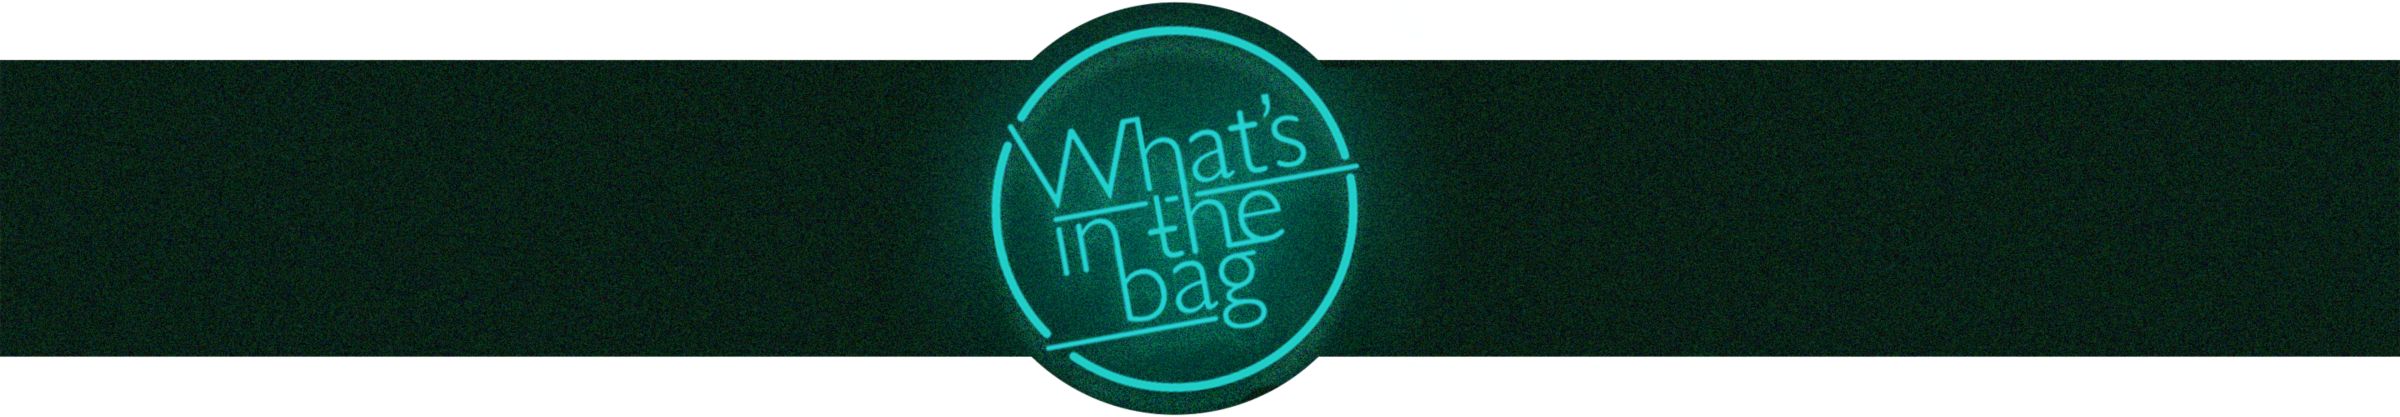 What's in the bag Neon sign